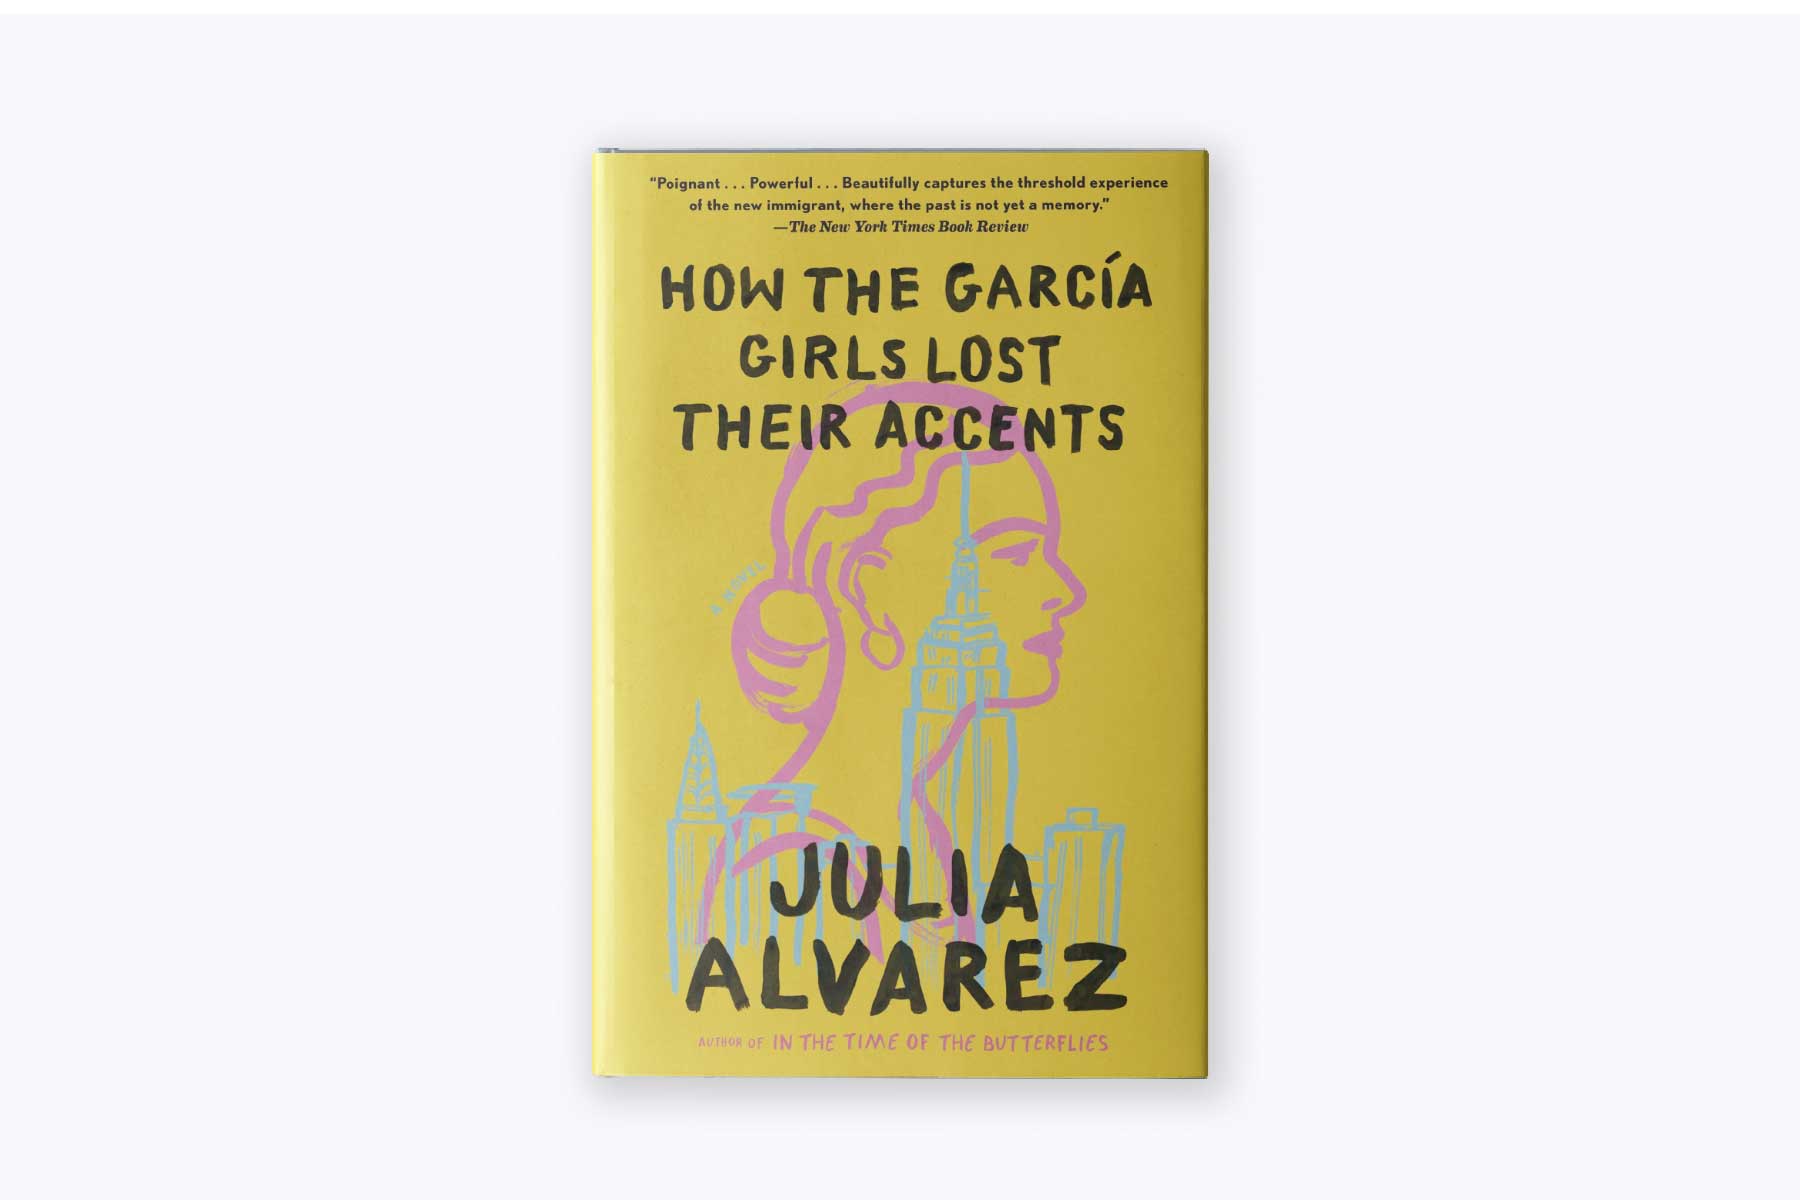 The cover of Julia Alvarez's book, How The Garcia Girls Lose Their Accents.